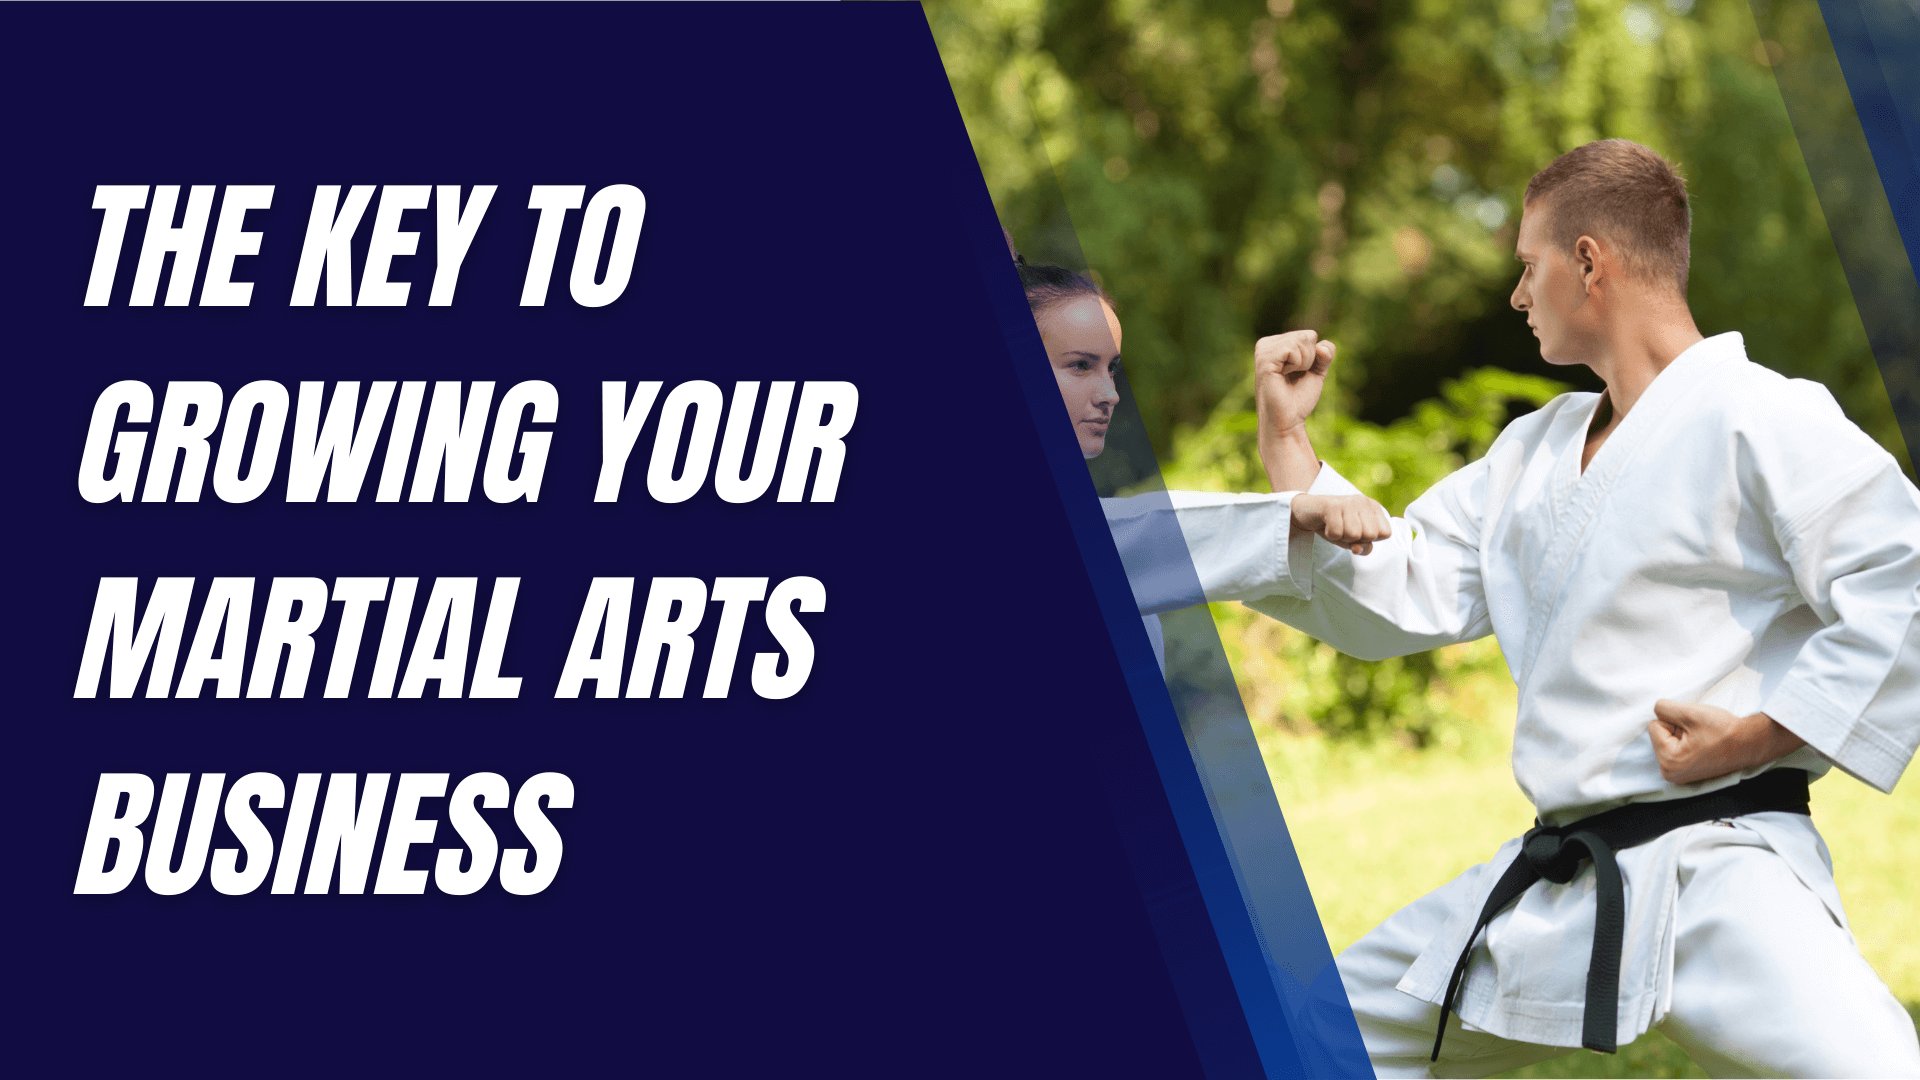 Converting Visitors into Subscribers: The Key to Growing Your Martial Arts Business